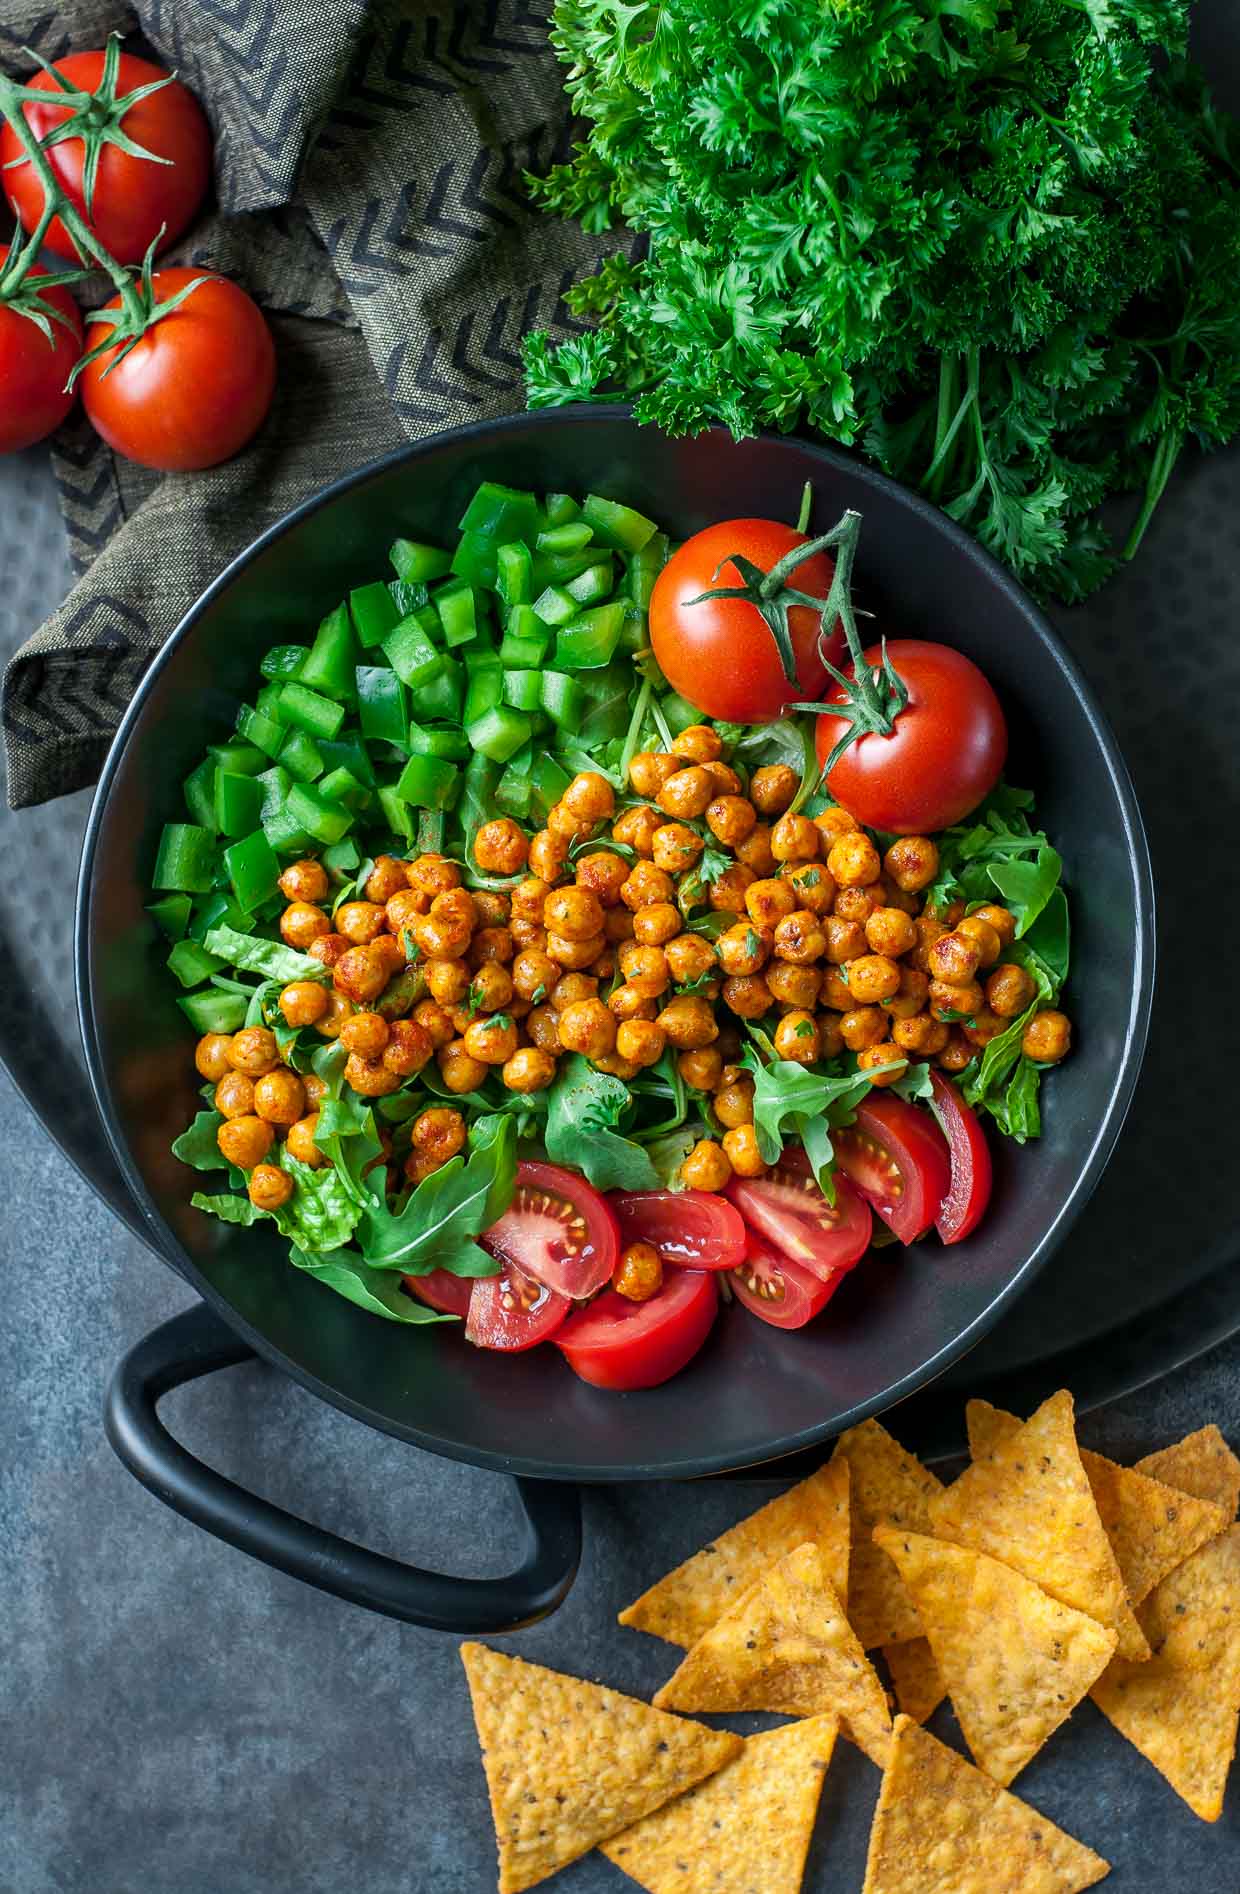 This Buffalo Chickpea Salad is super easy to make, loaded with veggies, and delivers a much needed high-five to the tastebuds. Try it today!